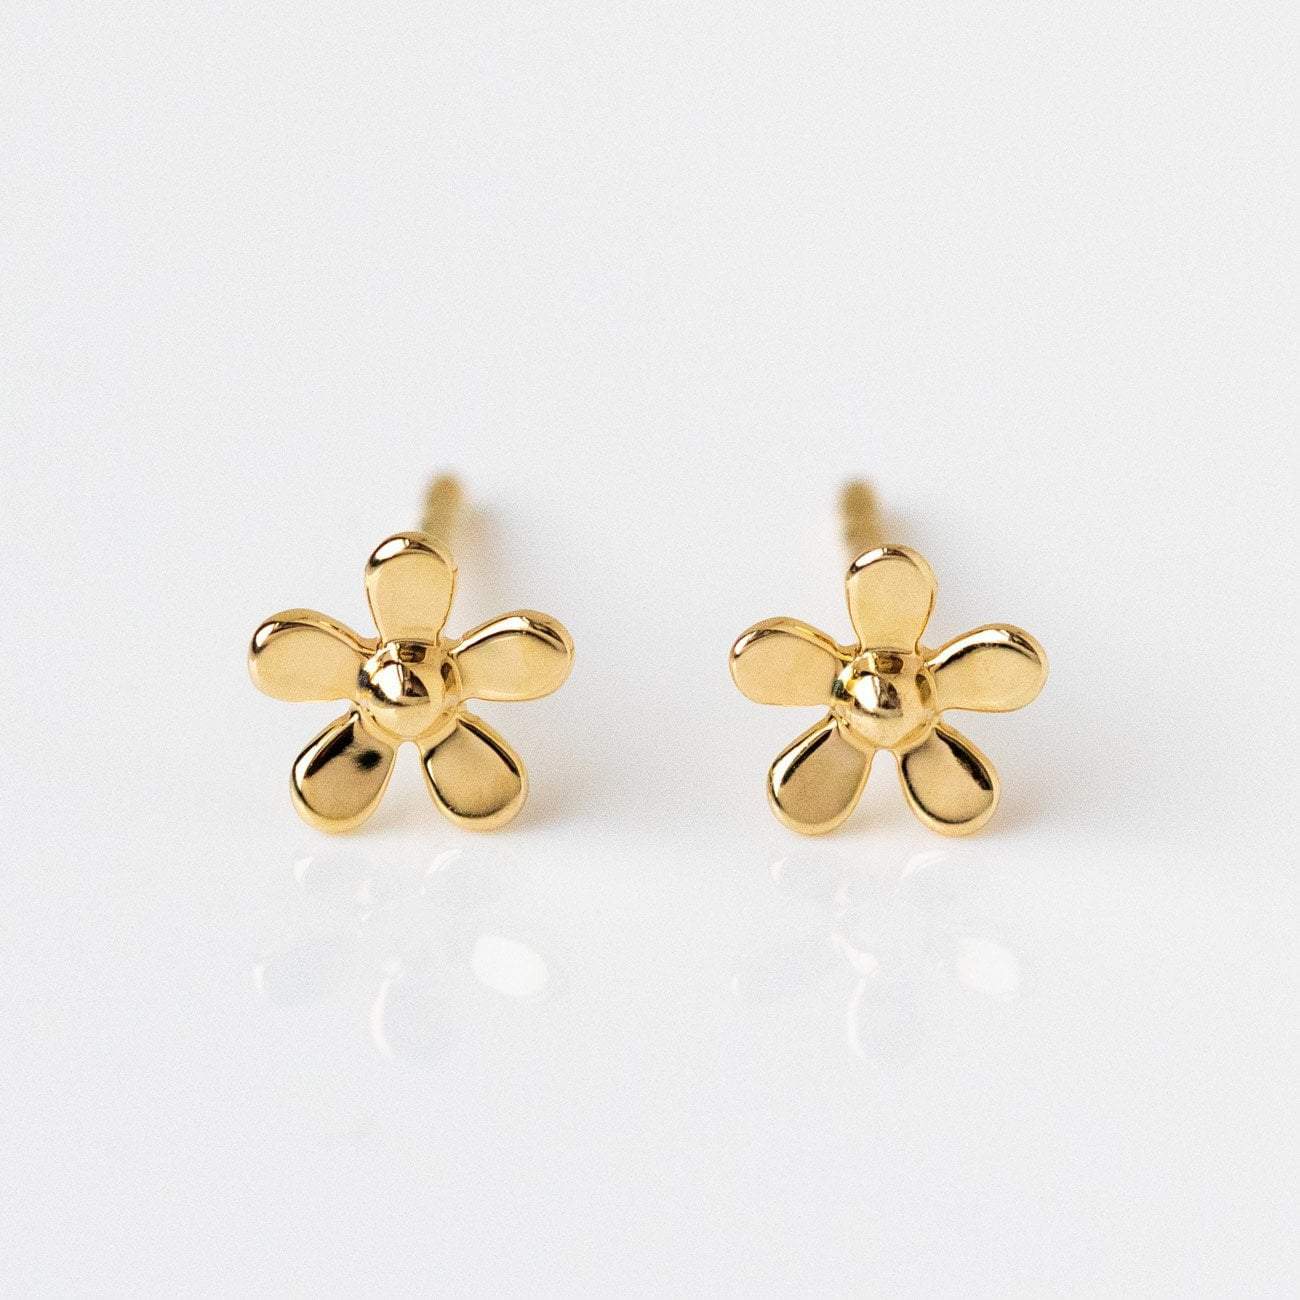 Solid Yellow Gold Daisy Stud Earrings Family Gold Floral Fine Jewelry